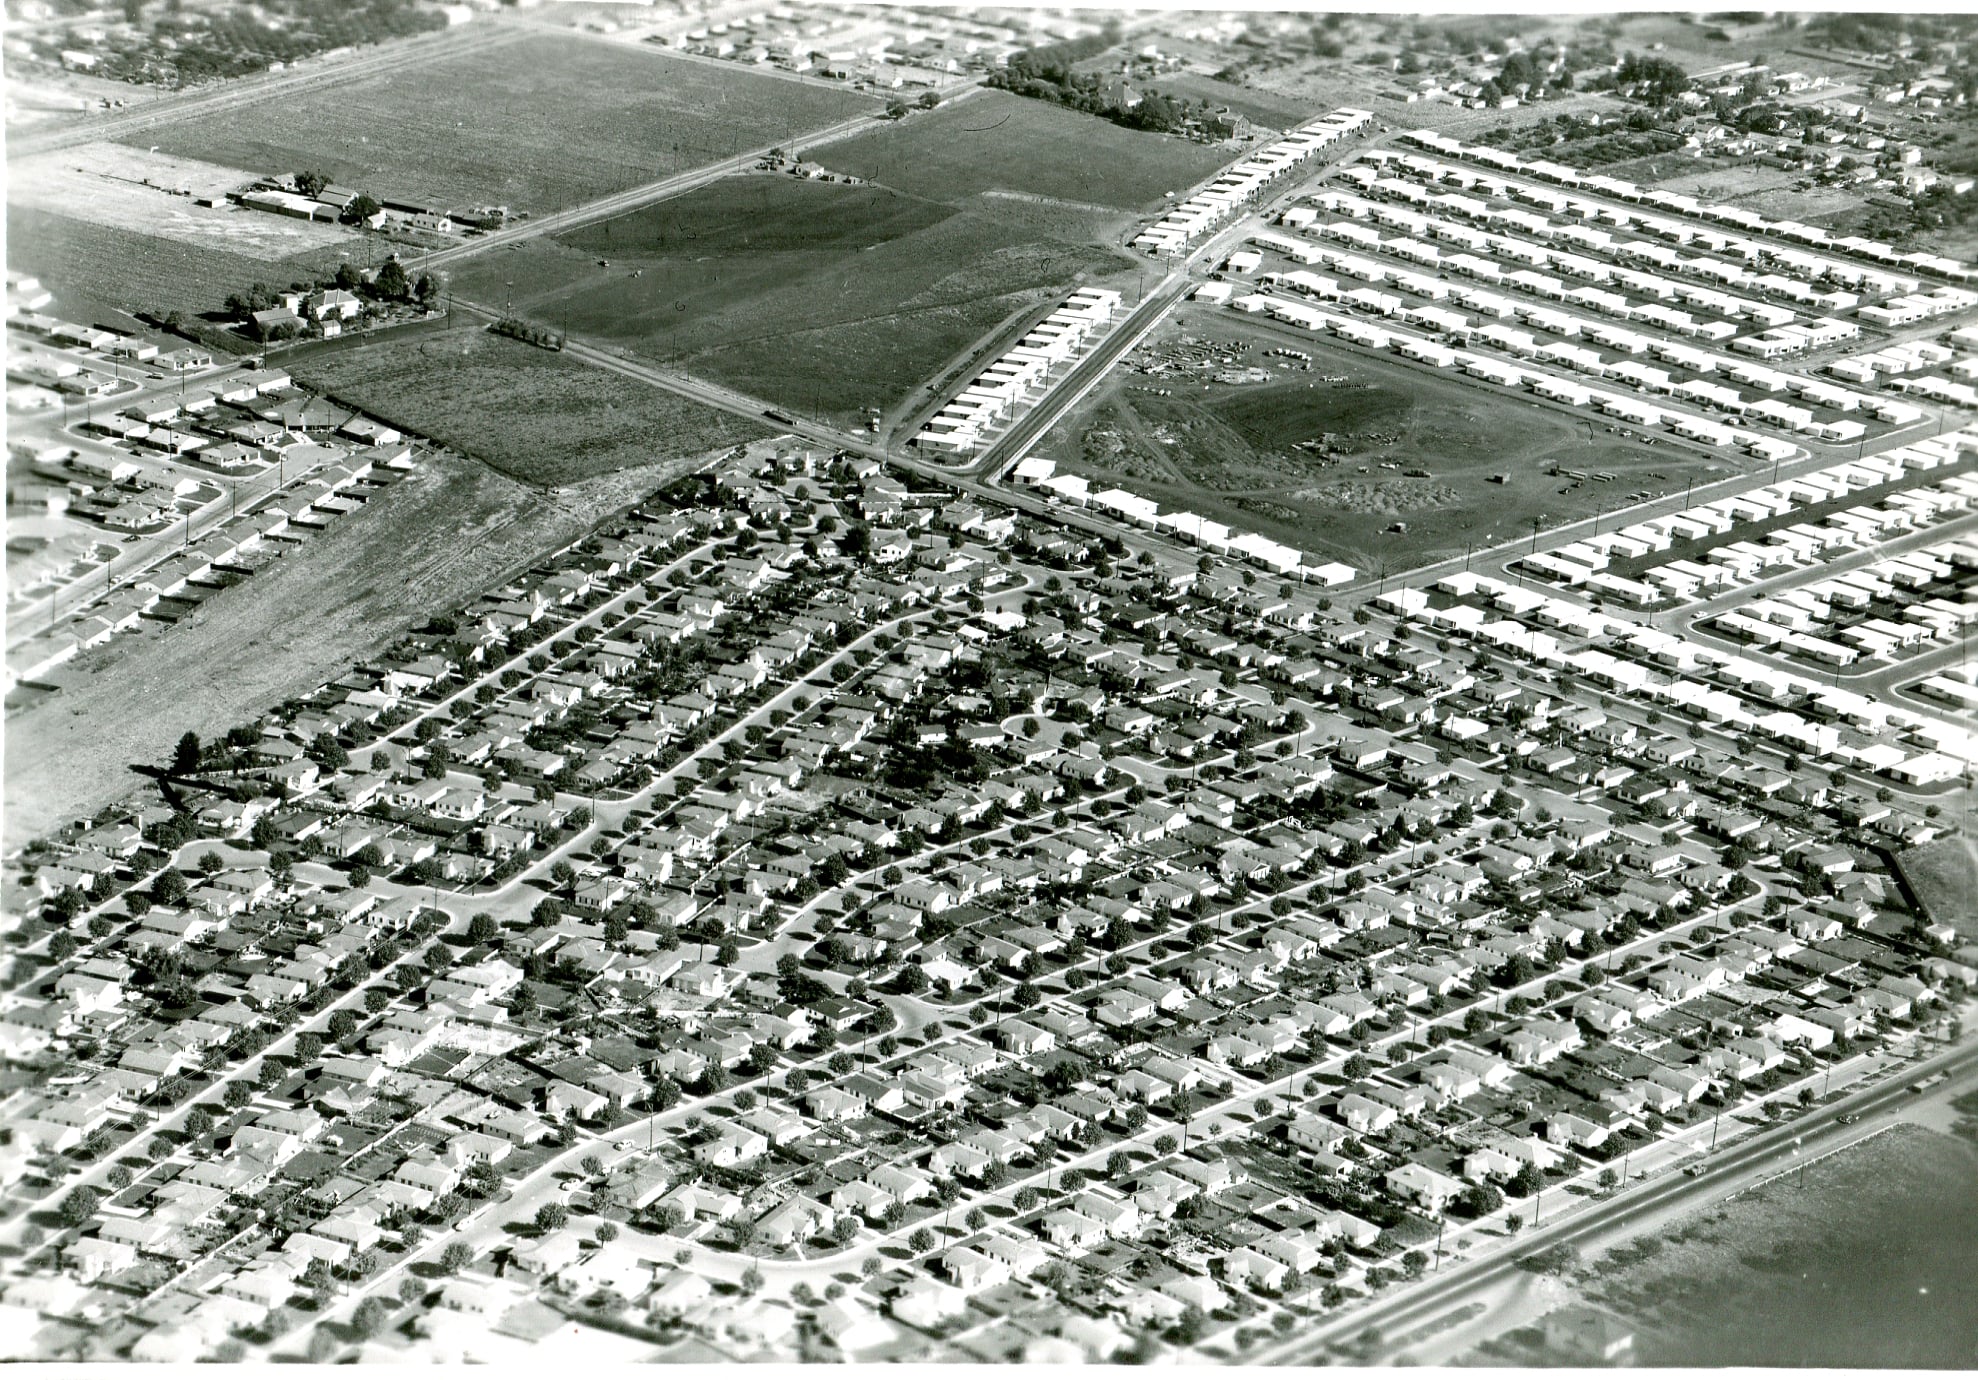 photo: An aerial view of San Lorenzo Village in 1950, which included nearly 1,500 single-family homes. Construction of the white-only subdivision began in 1944, in anticipation of the postwar increase in housing demand. Courtesy of the Hayward Area Historical Society Archives.